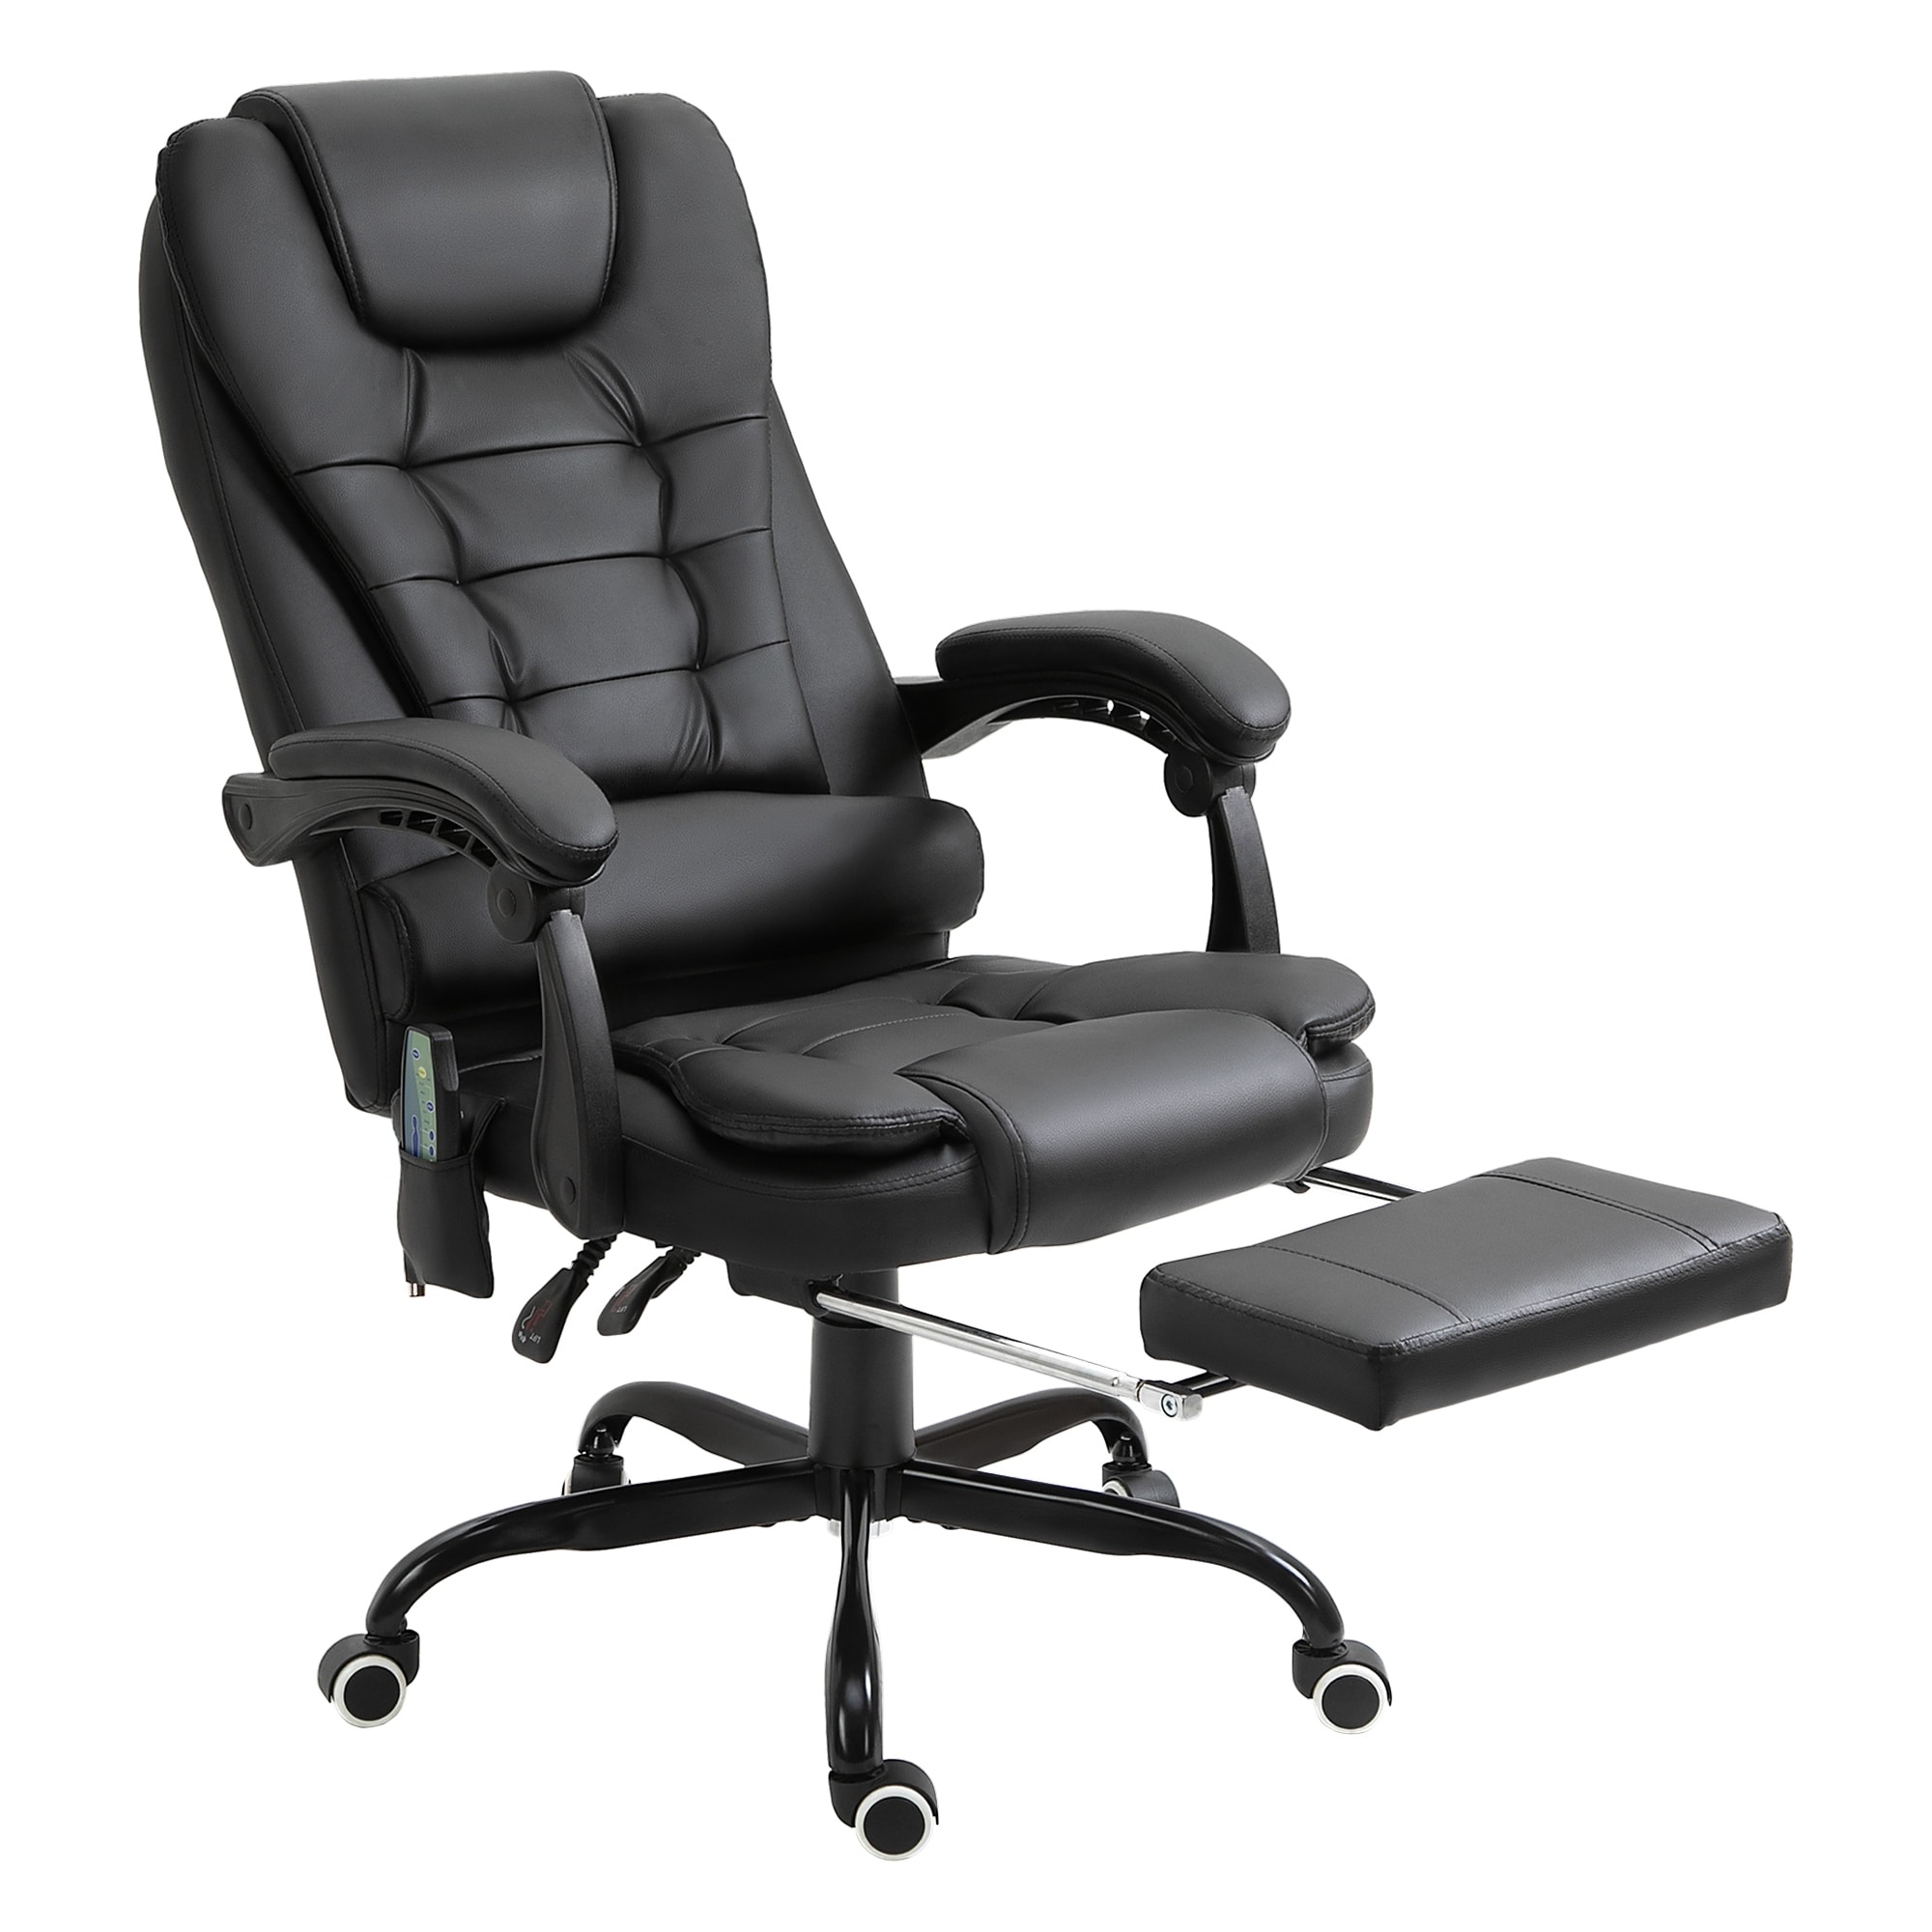 https://ak1.ostkcdn.com/images/products/is/images/direct/a76c62b34777bceebb32bb81d0b2b343a3c5d56f/Vinsetto-7-Point-Vibrating-Massage-Office-Chair-High-Back-Executive-Recliner-with-Lumbar-Support%2C-Footrest%2C-Reclining-Back.jpg